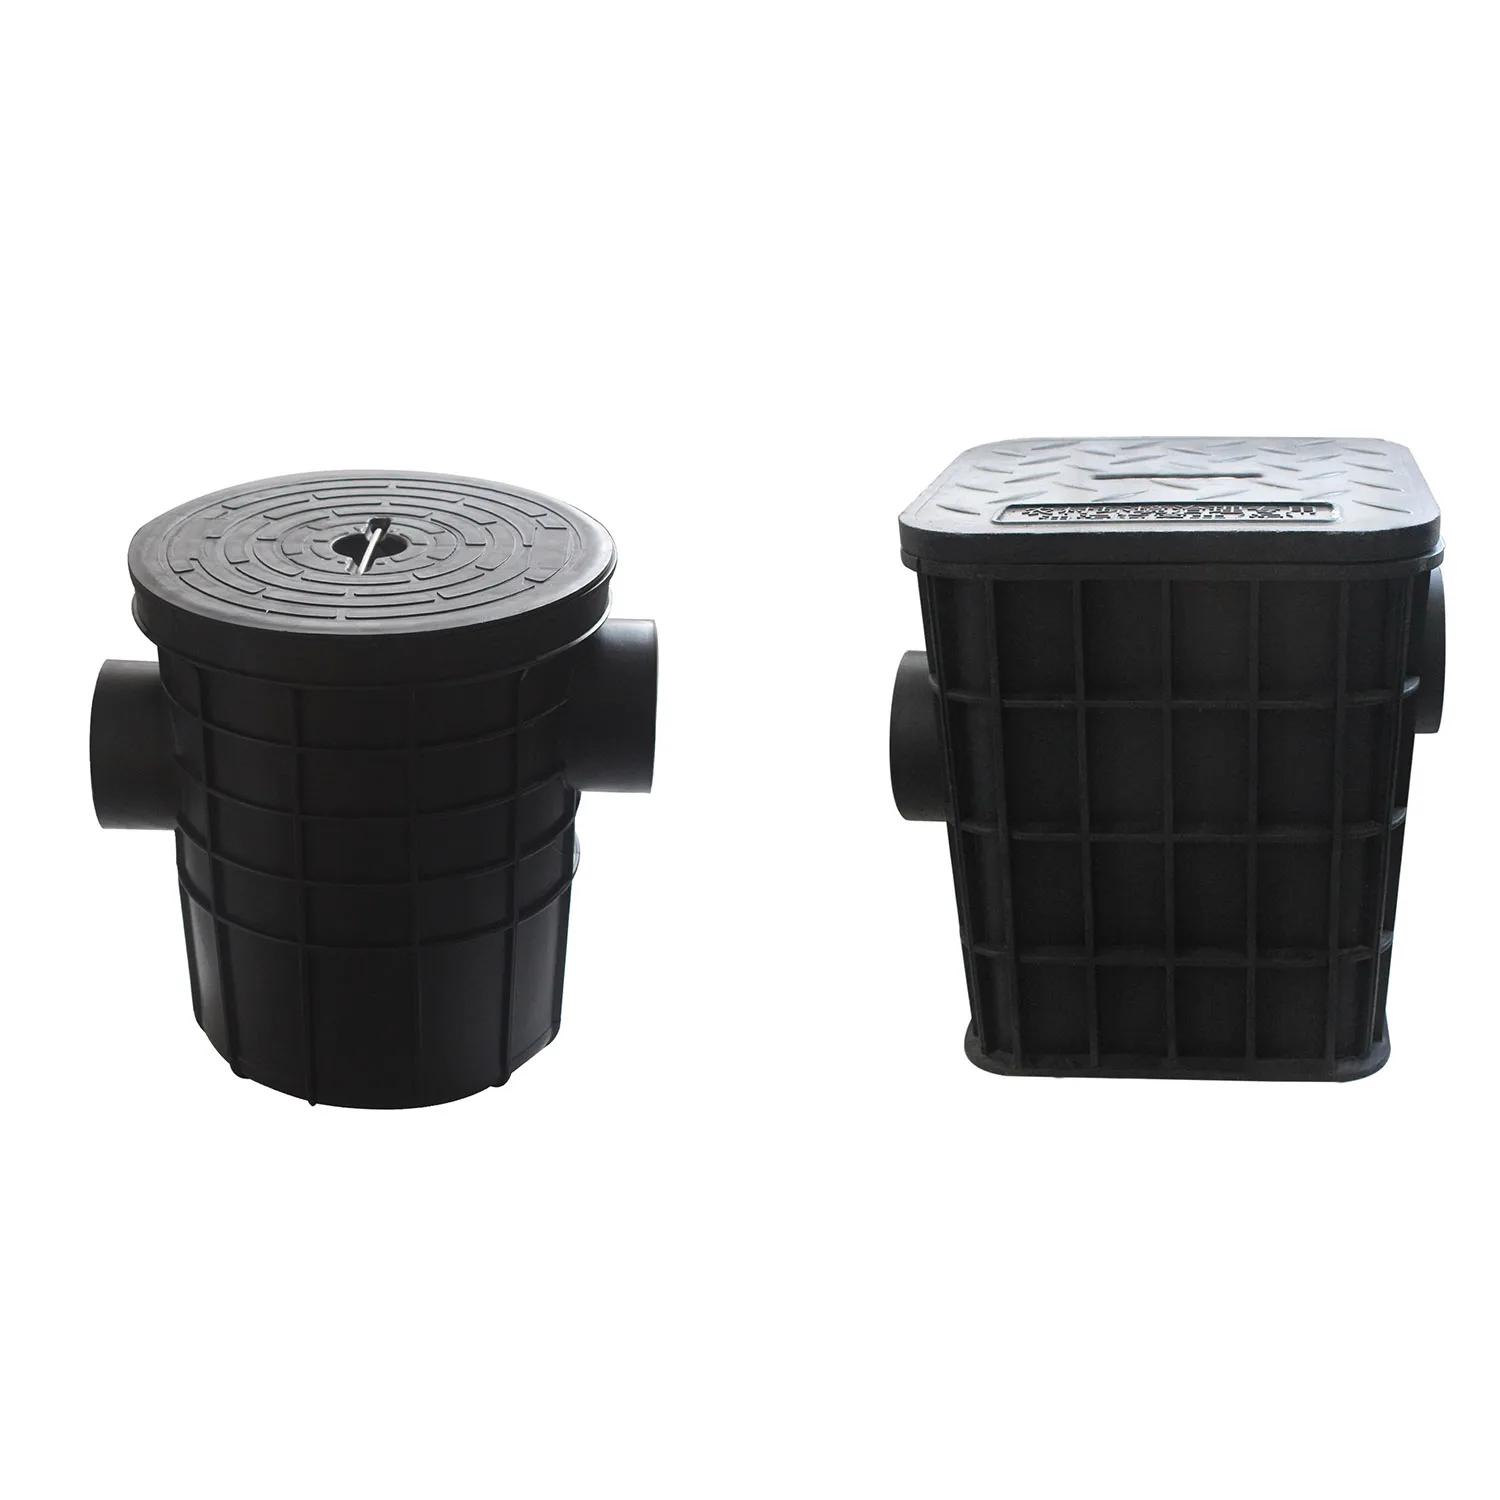 Underground grease trap HDPE grease separator kitchen sink for restaurants or gastronomy  Round  Square